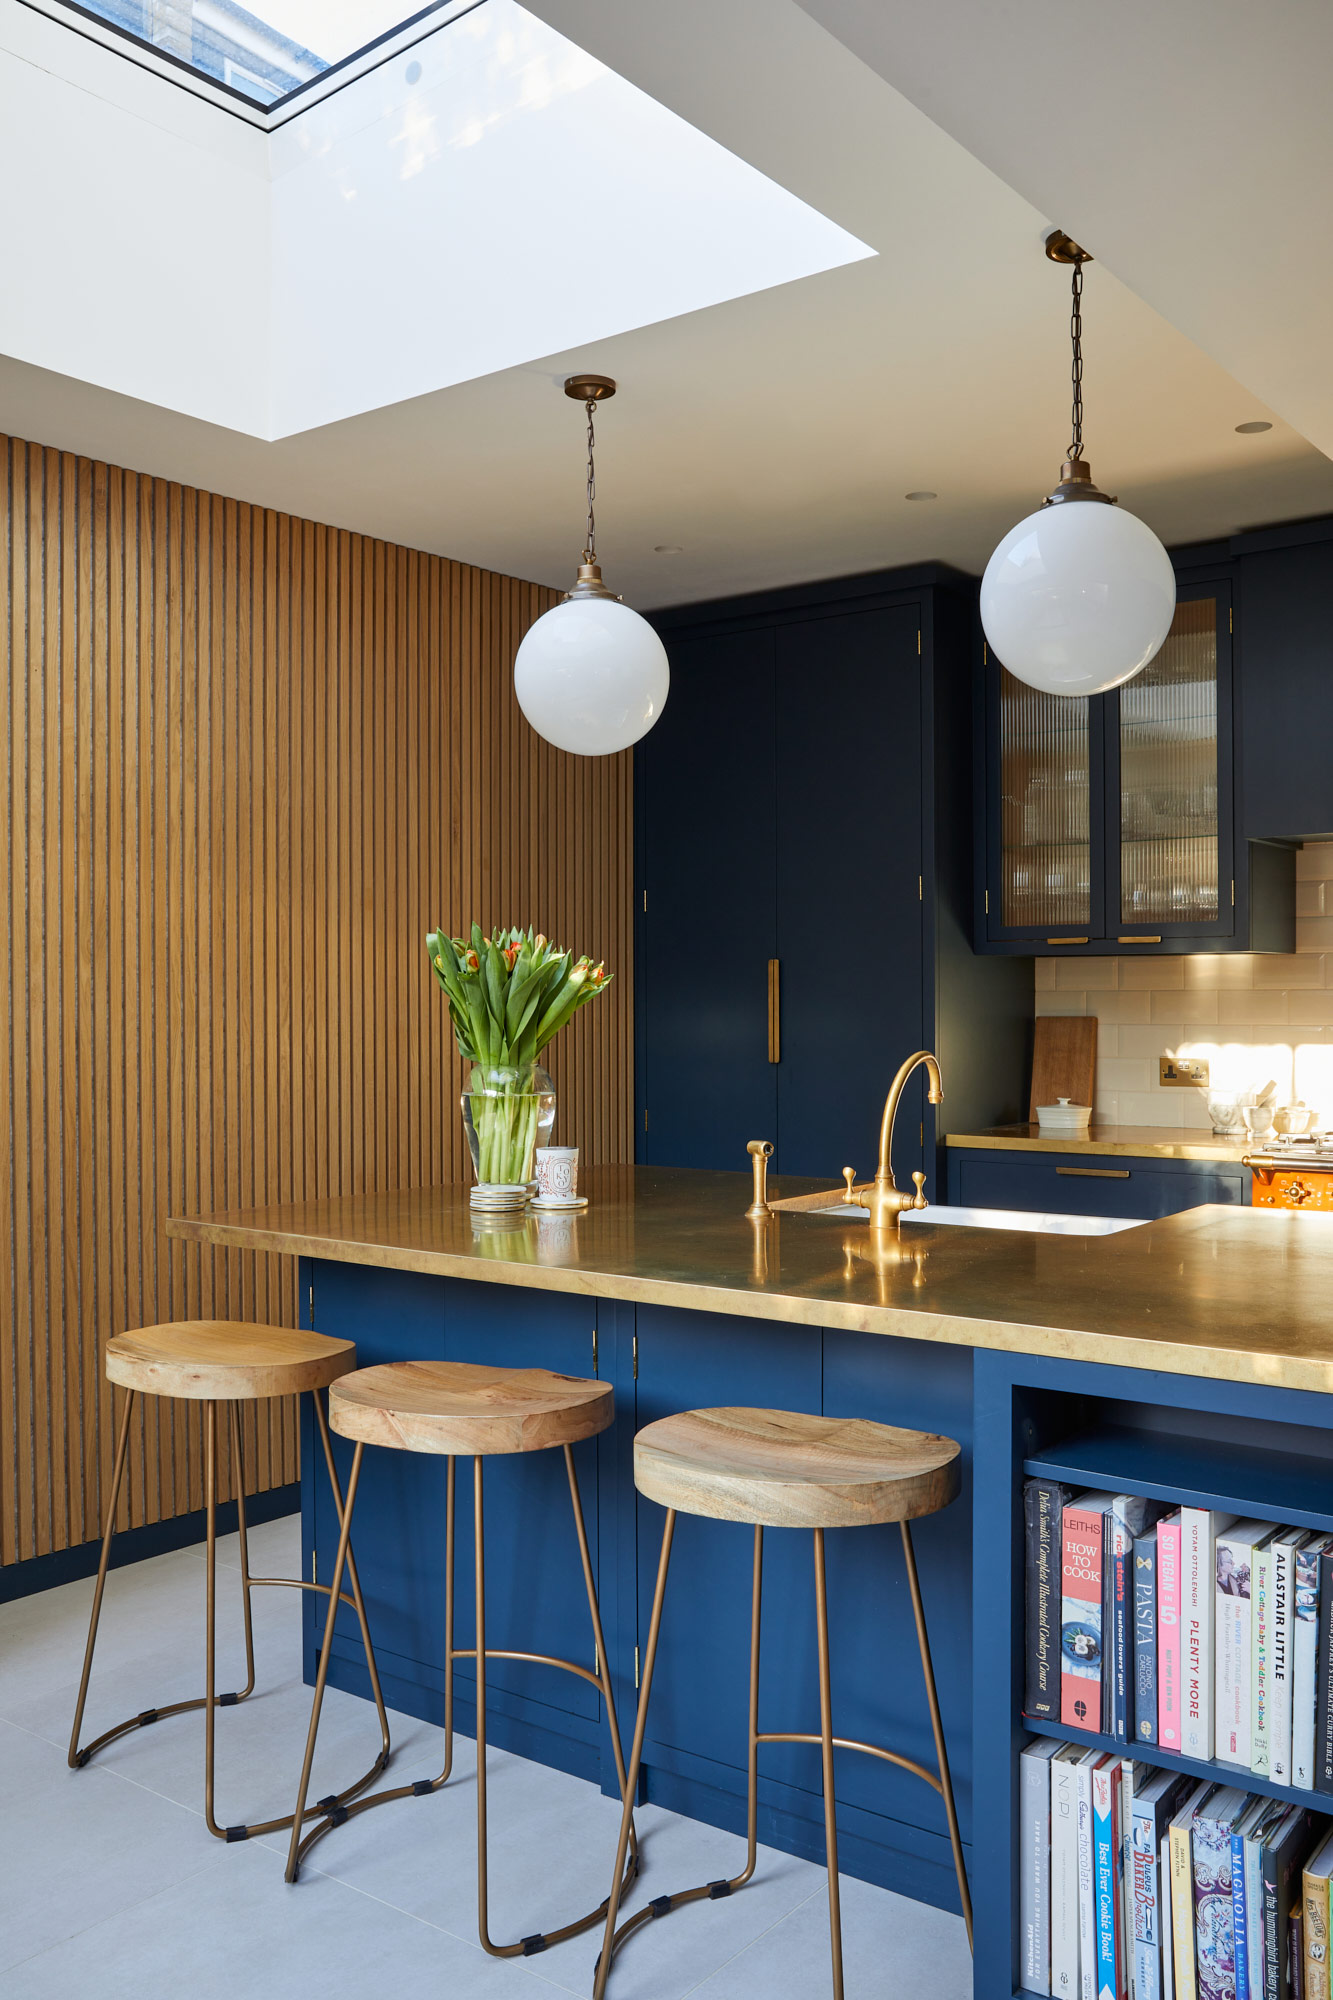 Clean oak and painted blue kitchen design handmade in Yorkshire